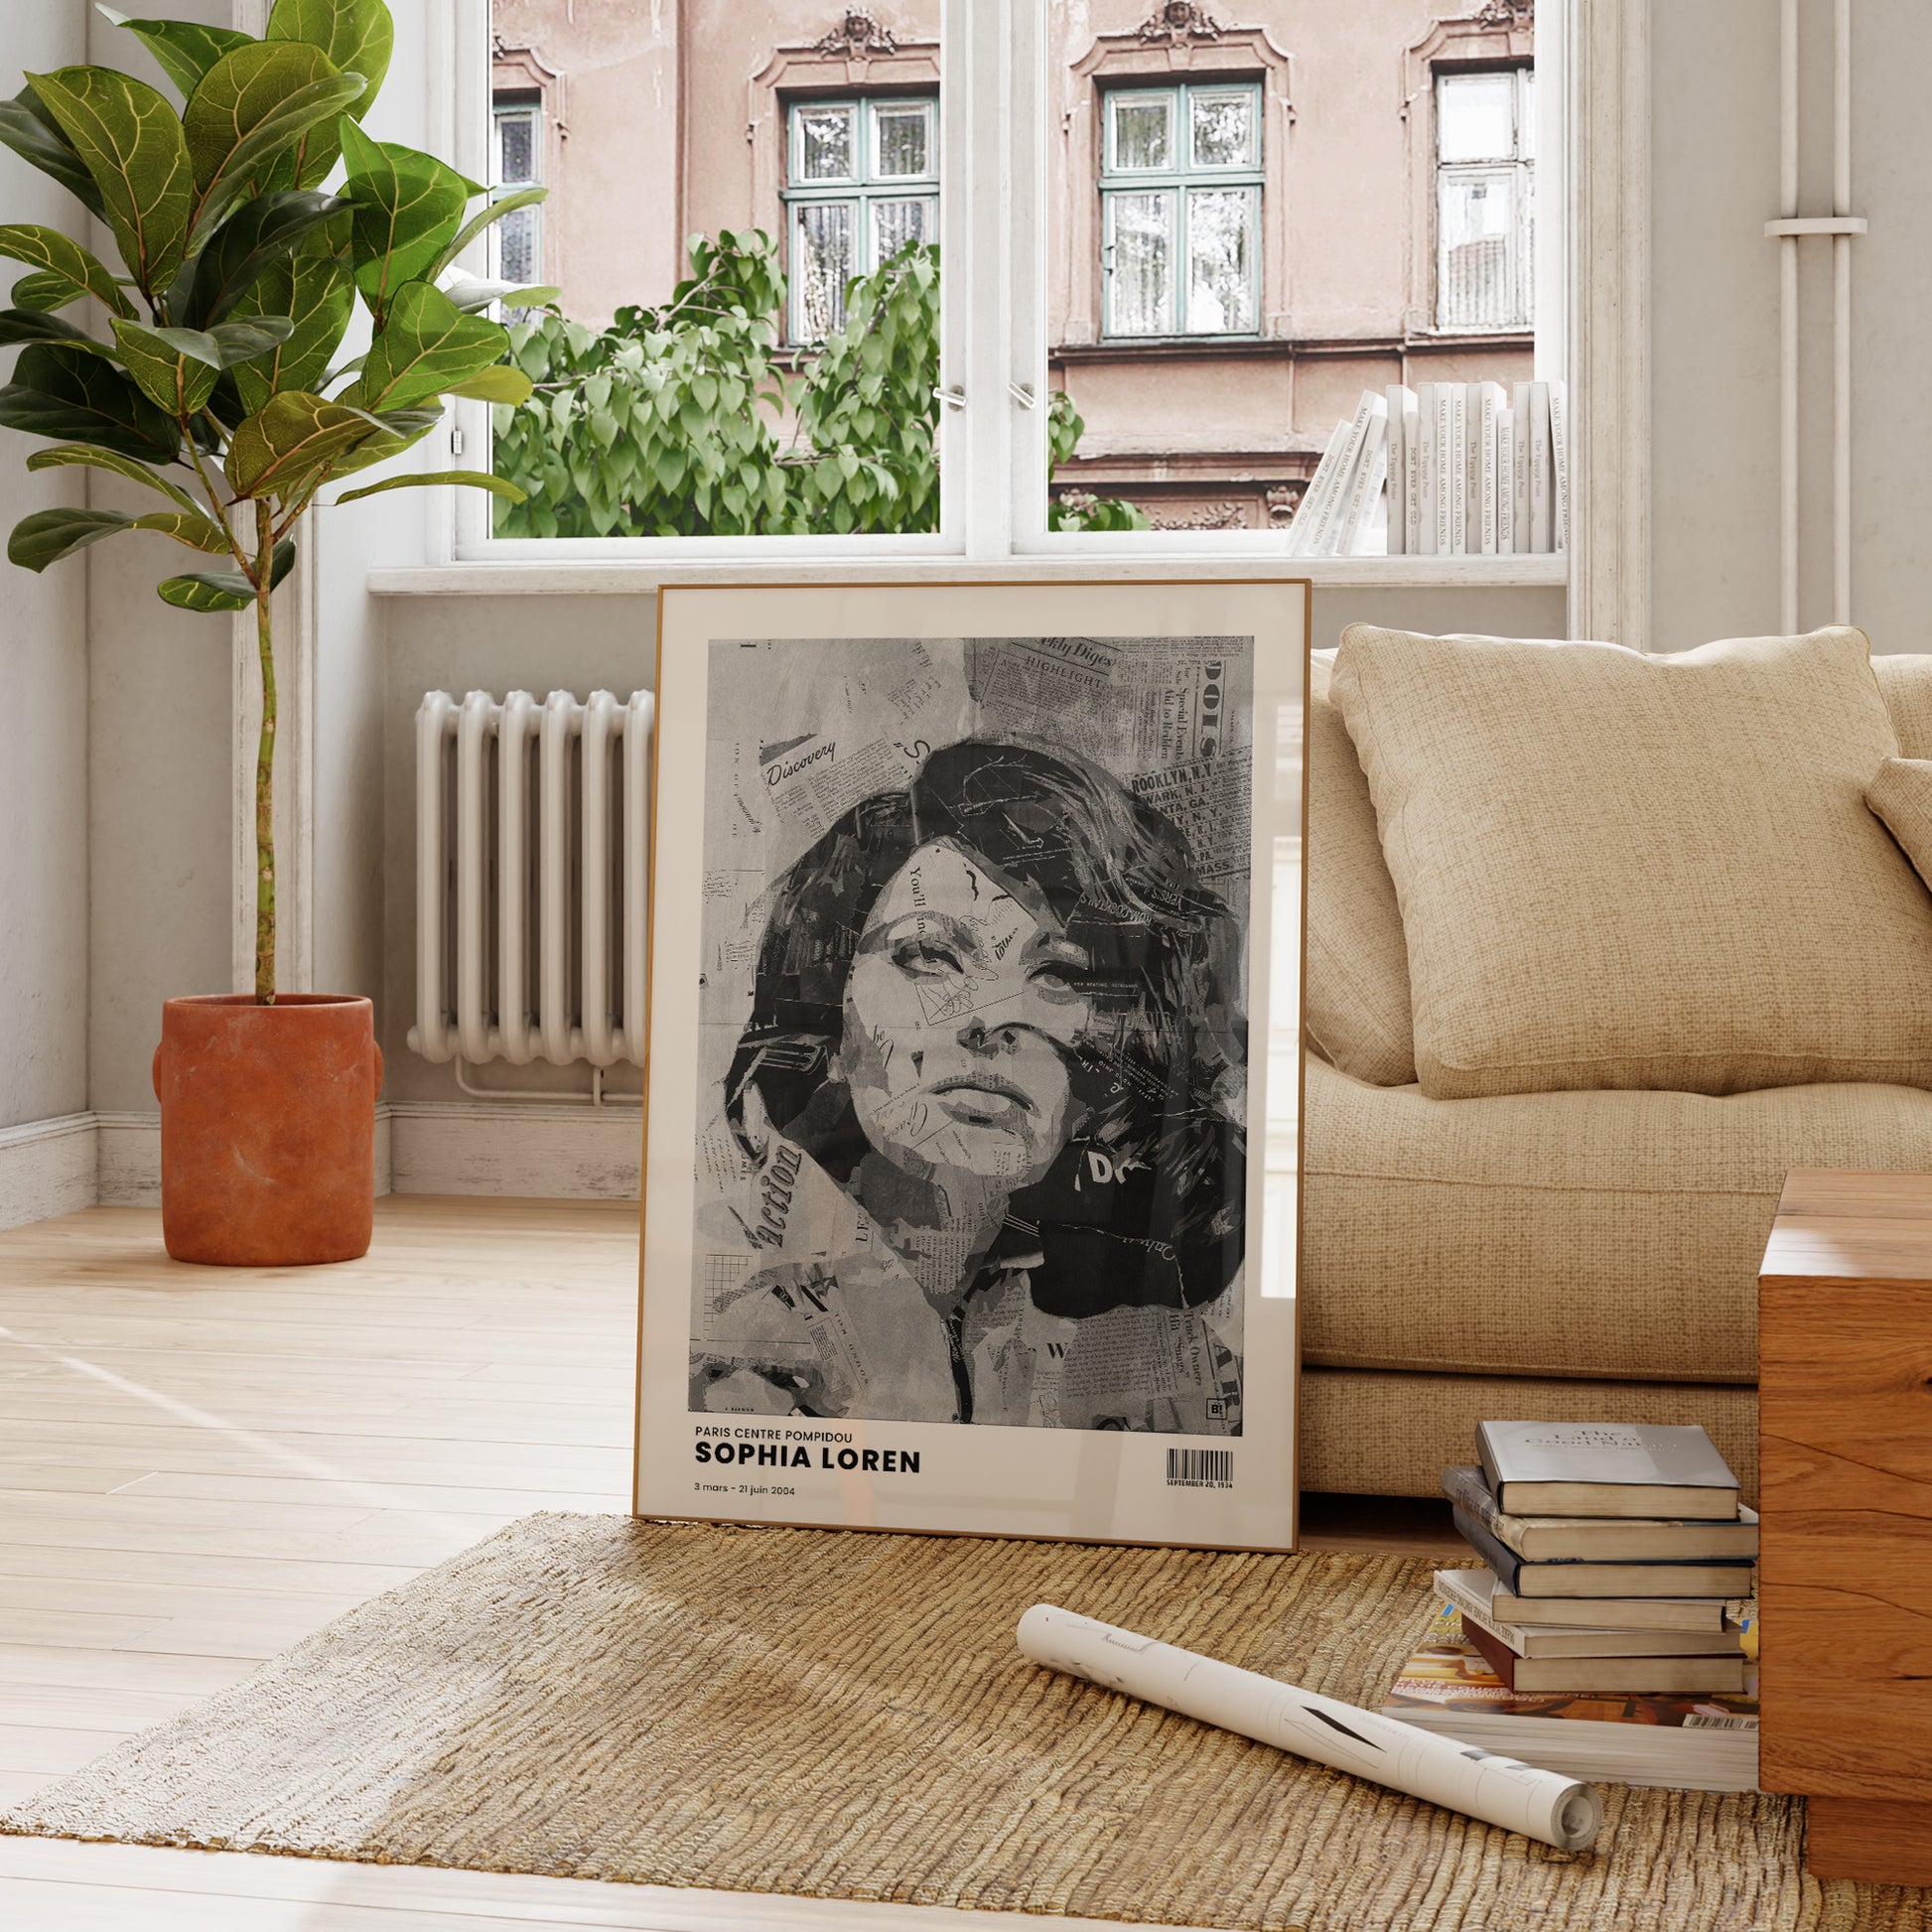 Be inspired by Iconic Sophia Loren Paris Centre Pompidou Exhibition Art Print. The artwork is presented in a bohemian room that captures its timeless beauty in every detail.